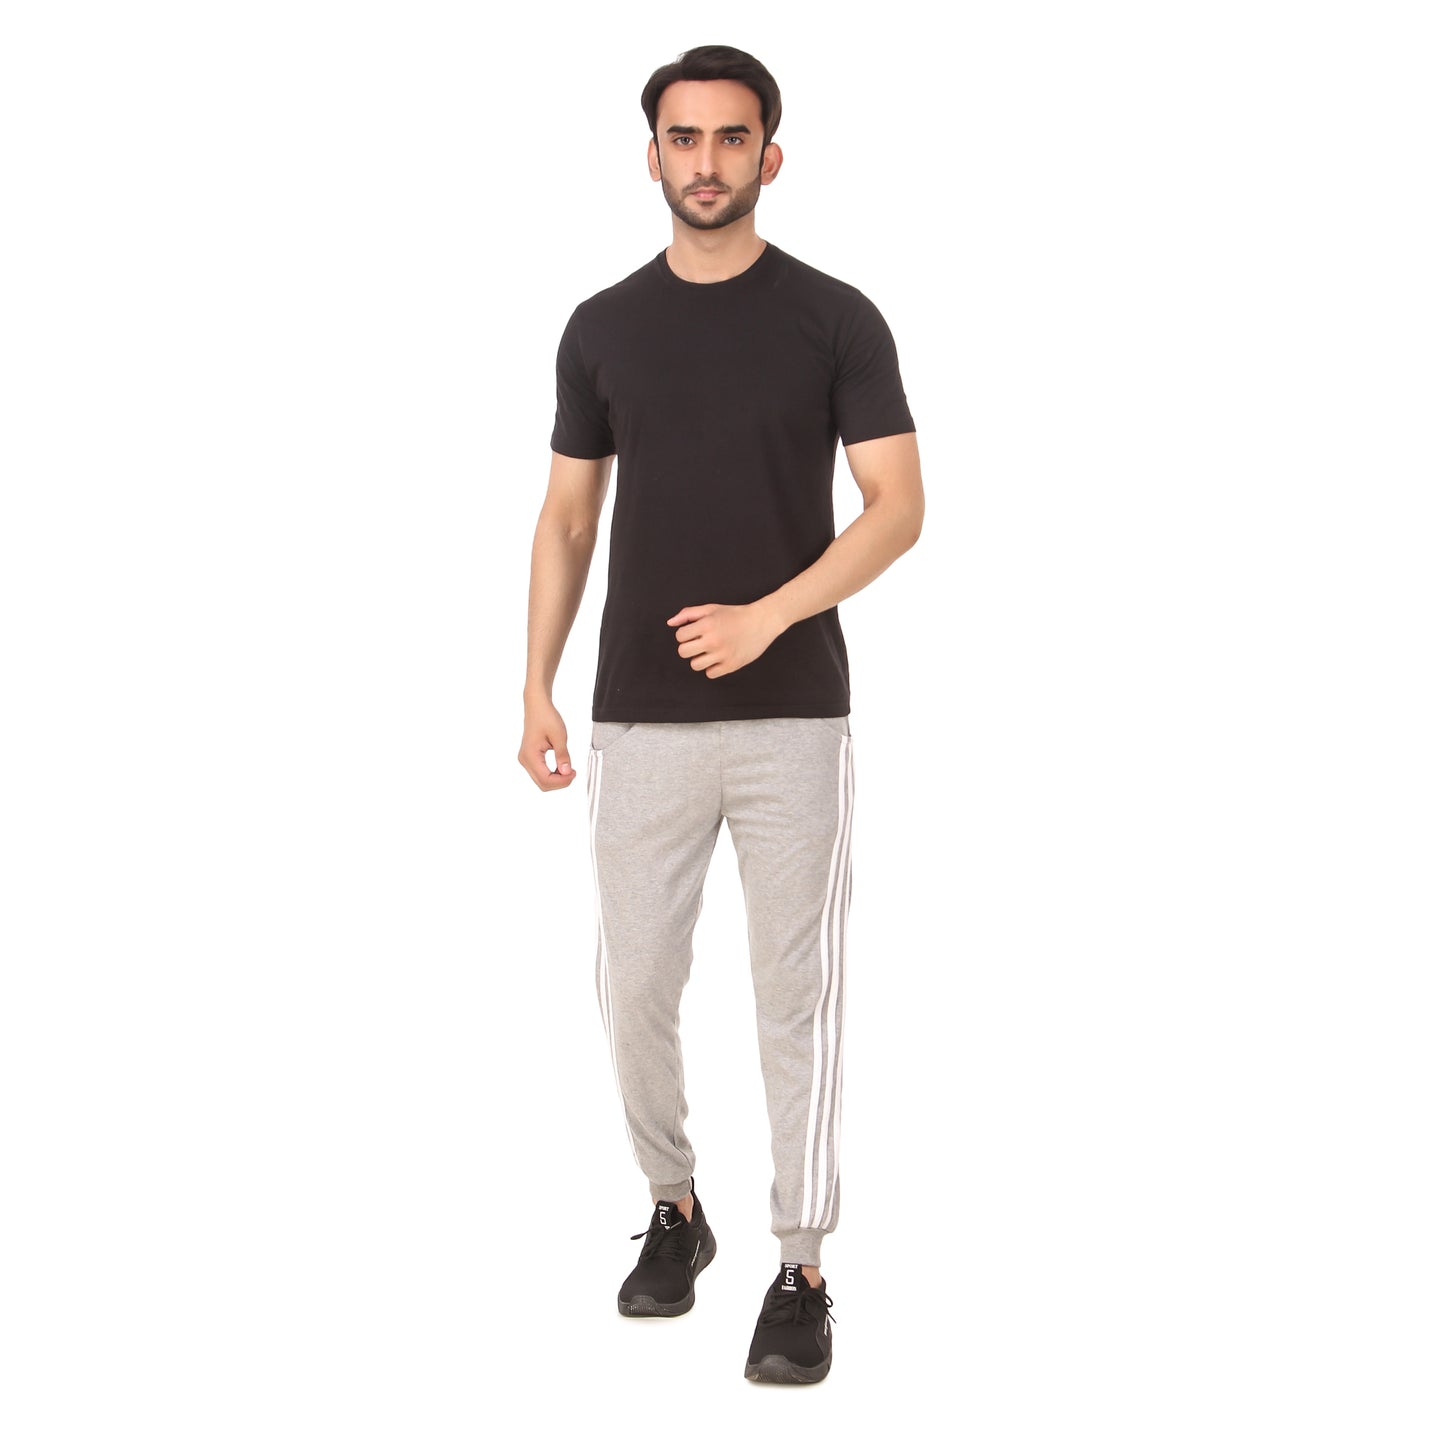 Men's Casual Solid Track Pants Grey